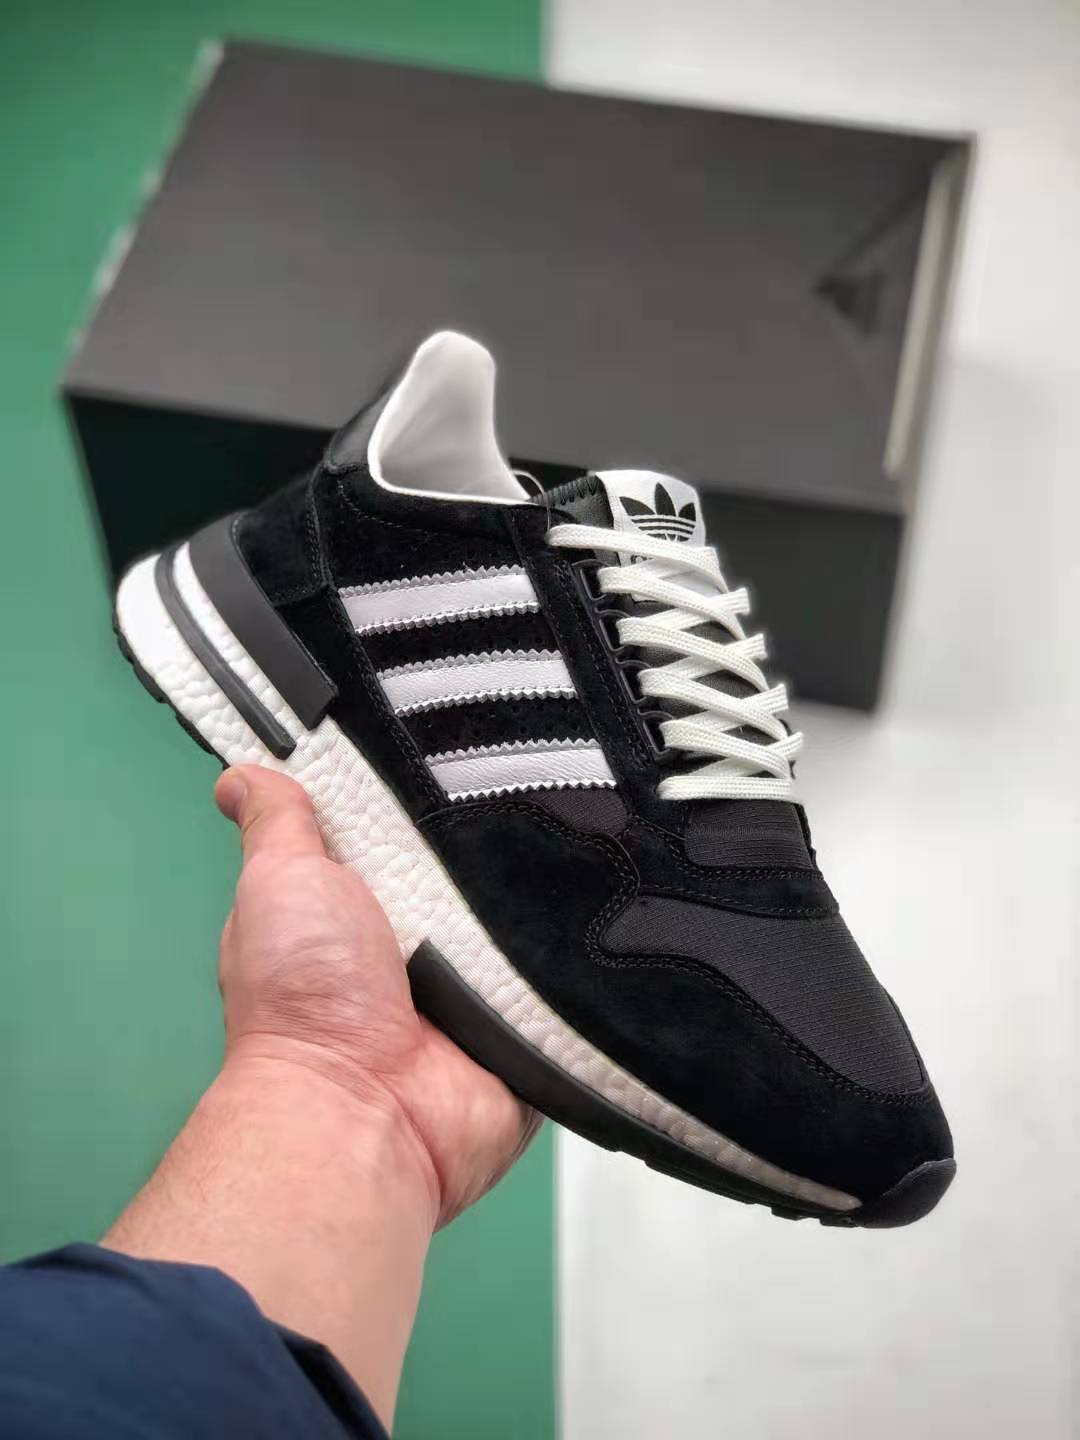 Adidas ZX500 RM Boost Originals BB6822 - Comfortable and Stylish Footwear